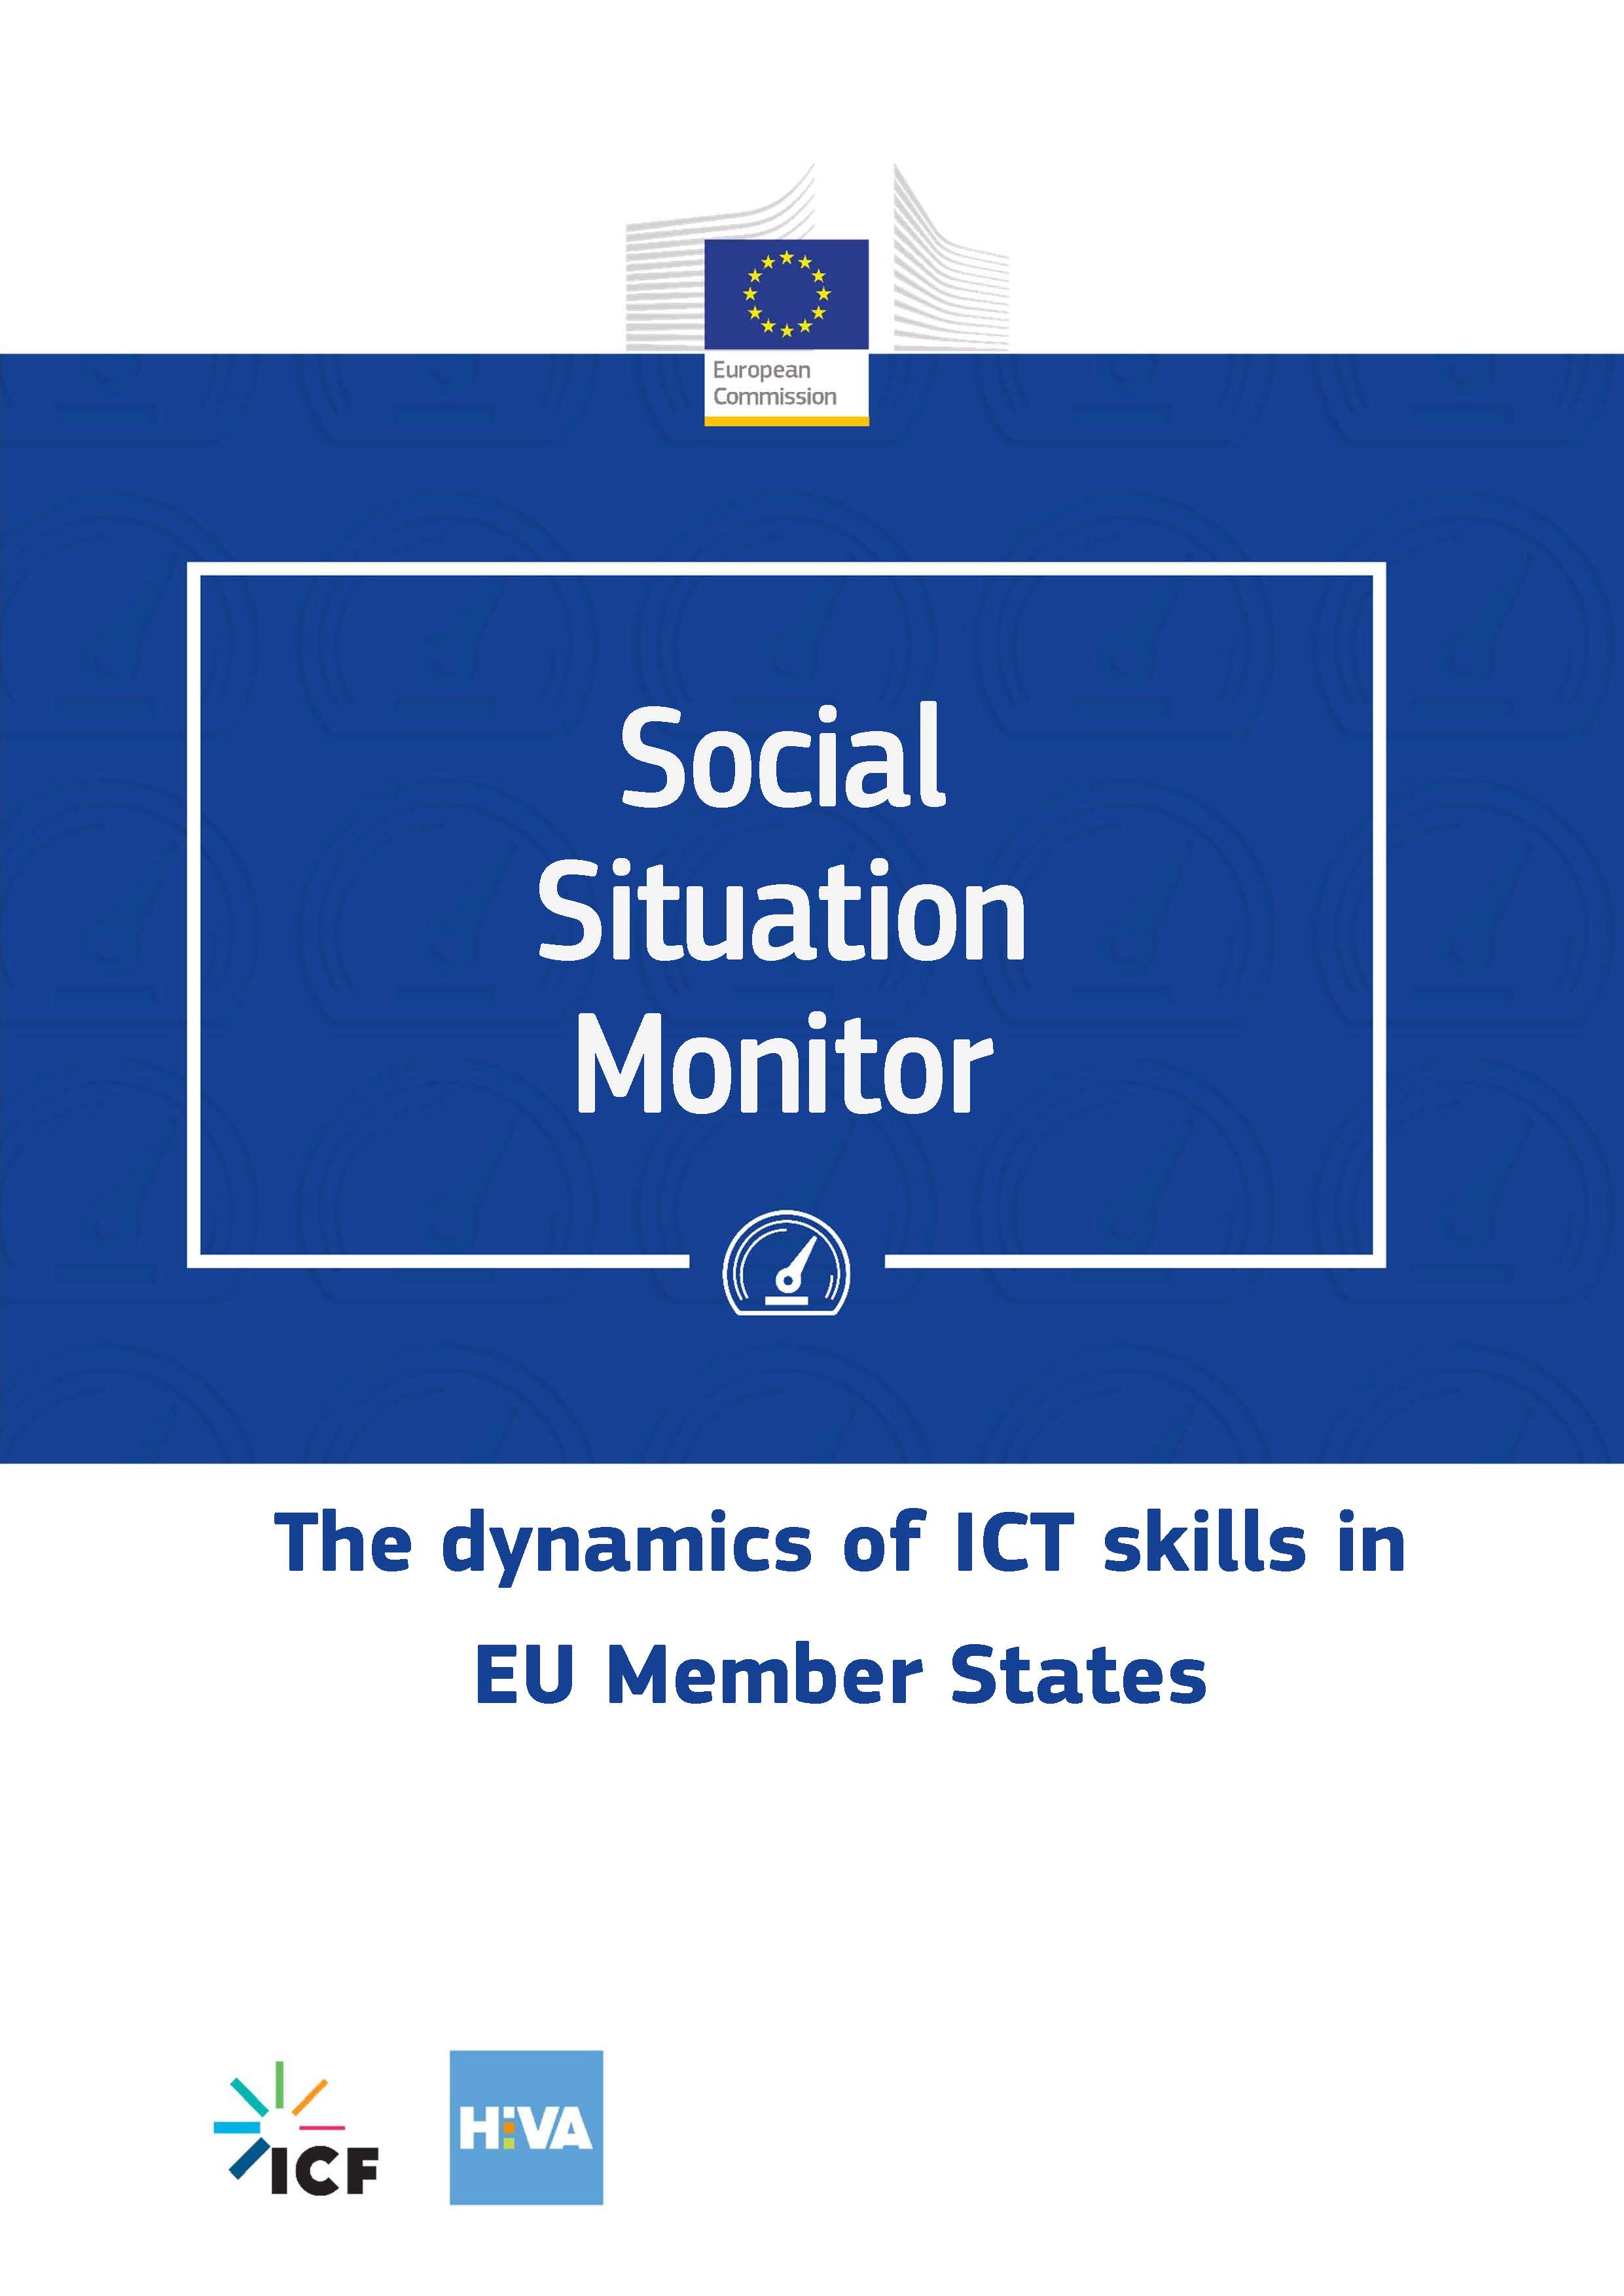 The Dynamics of ICT skills in EU Member States